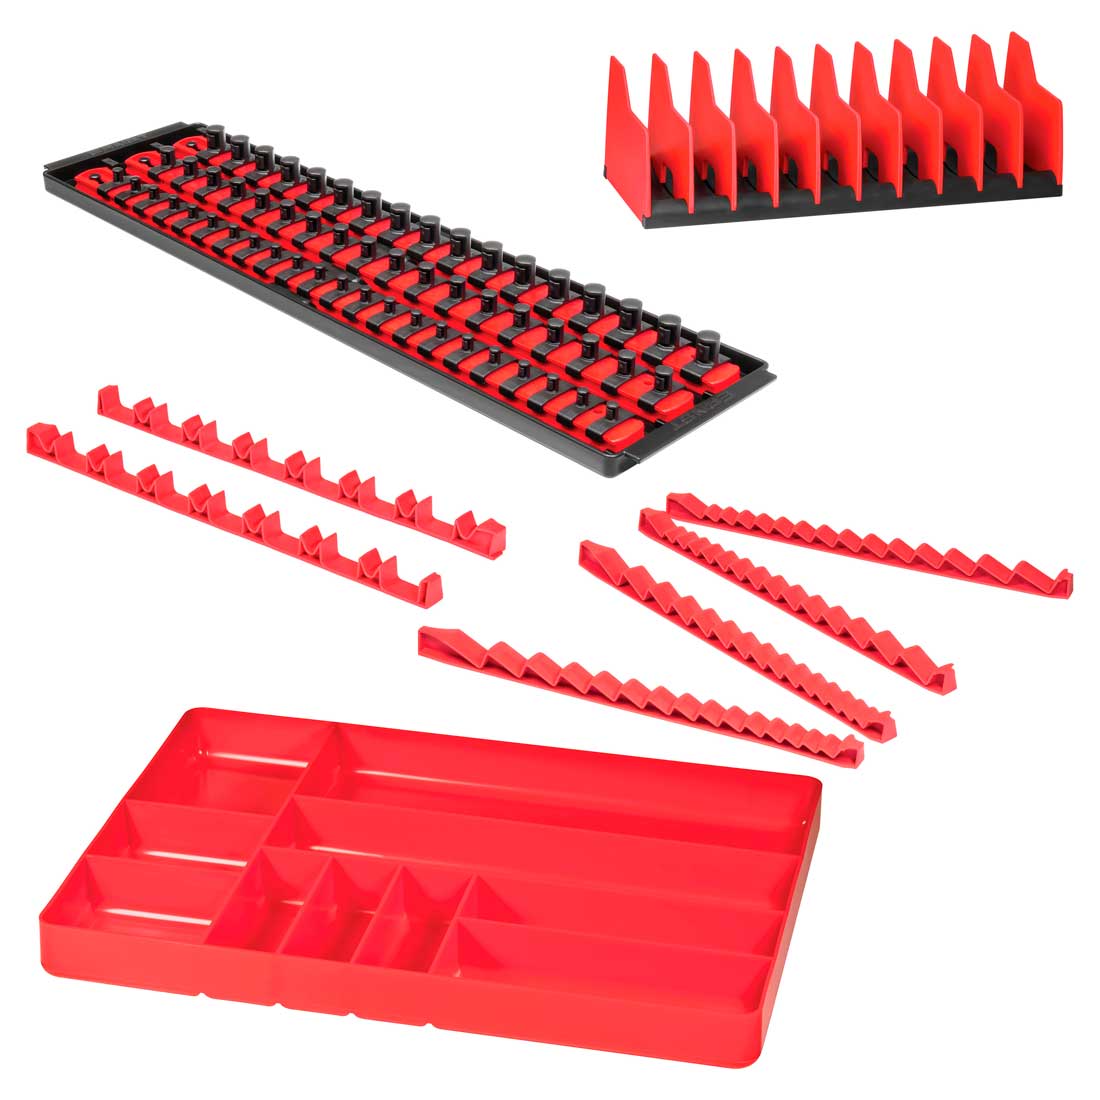 Ten Compartment Tool and Parts Organizer Tray by Ernst Manufacturing of  Oregon, USA